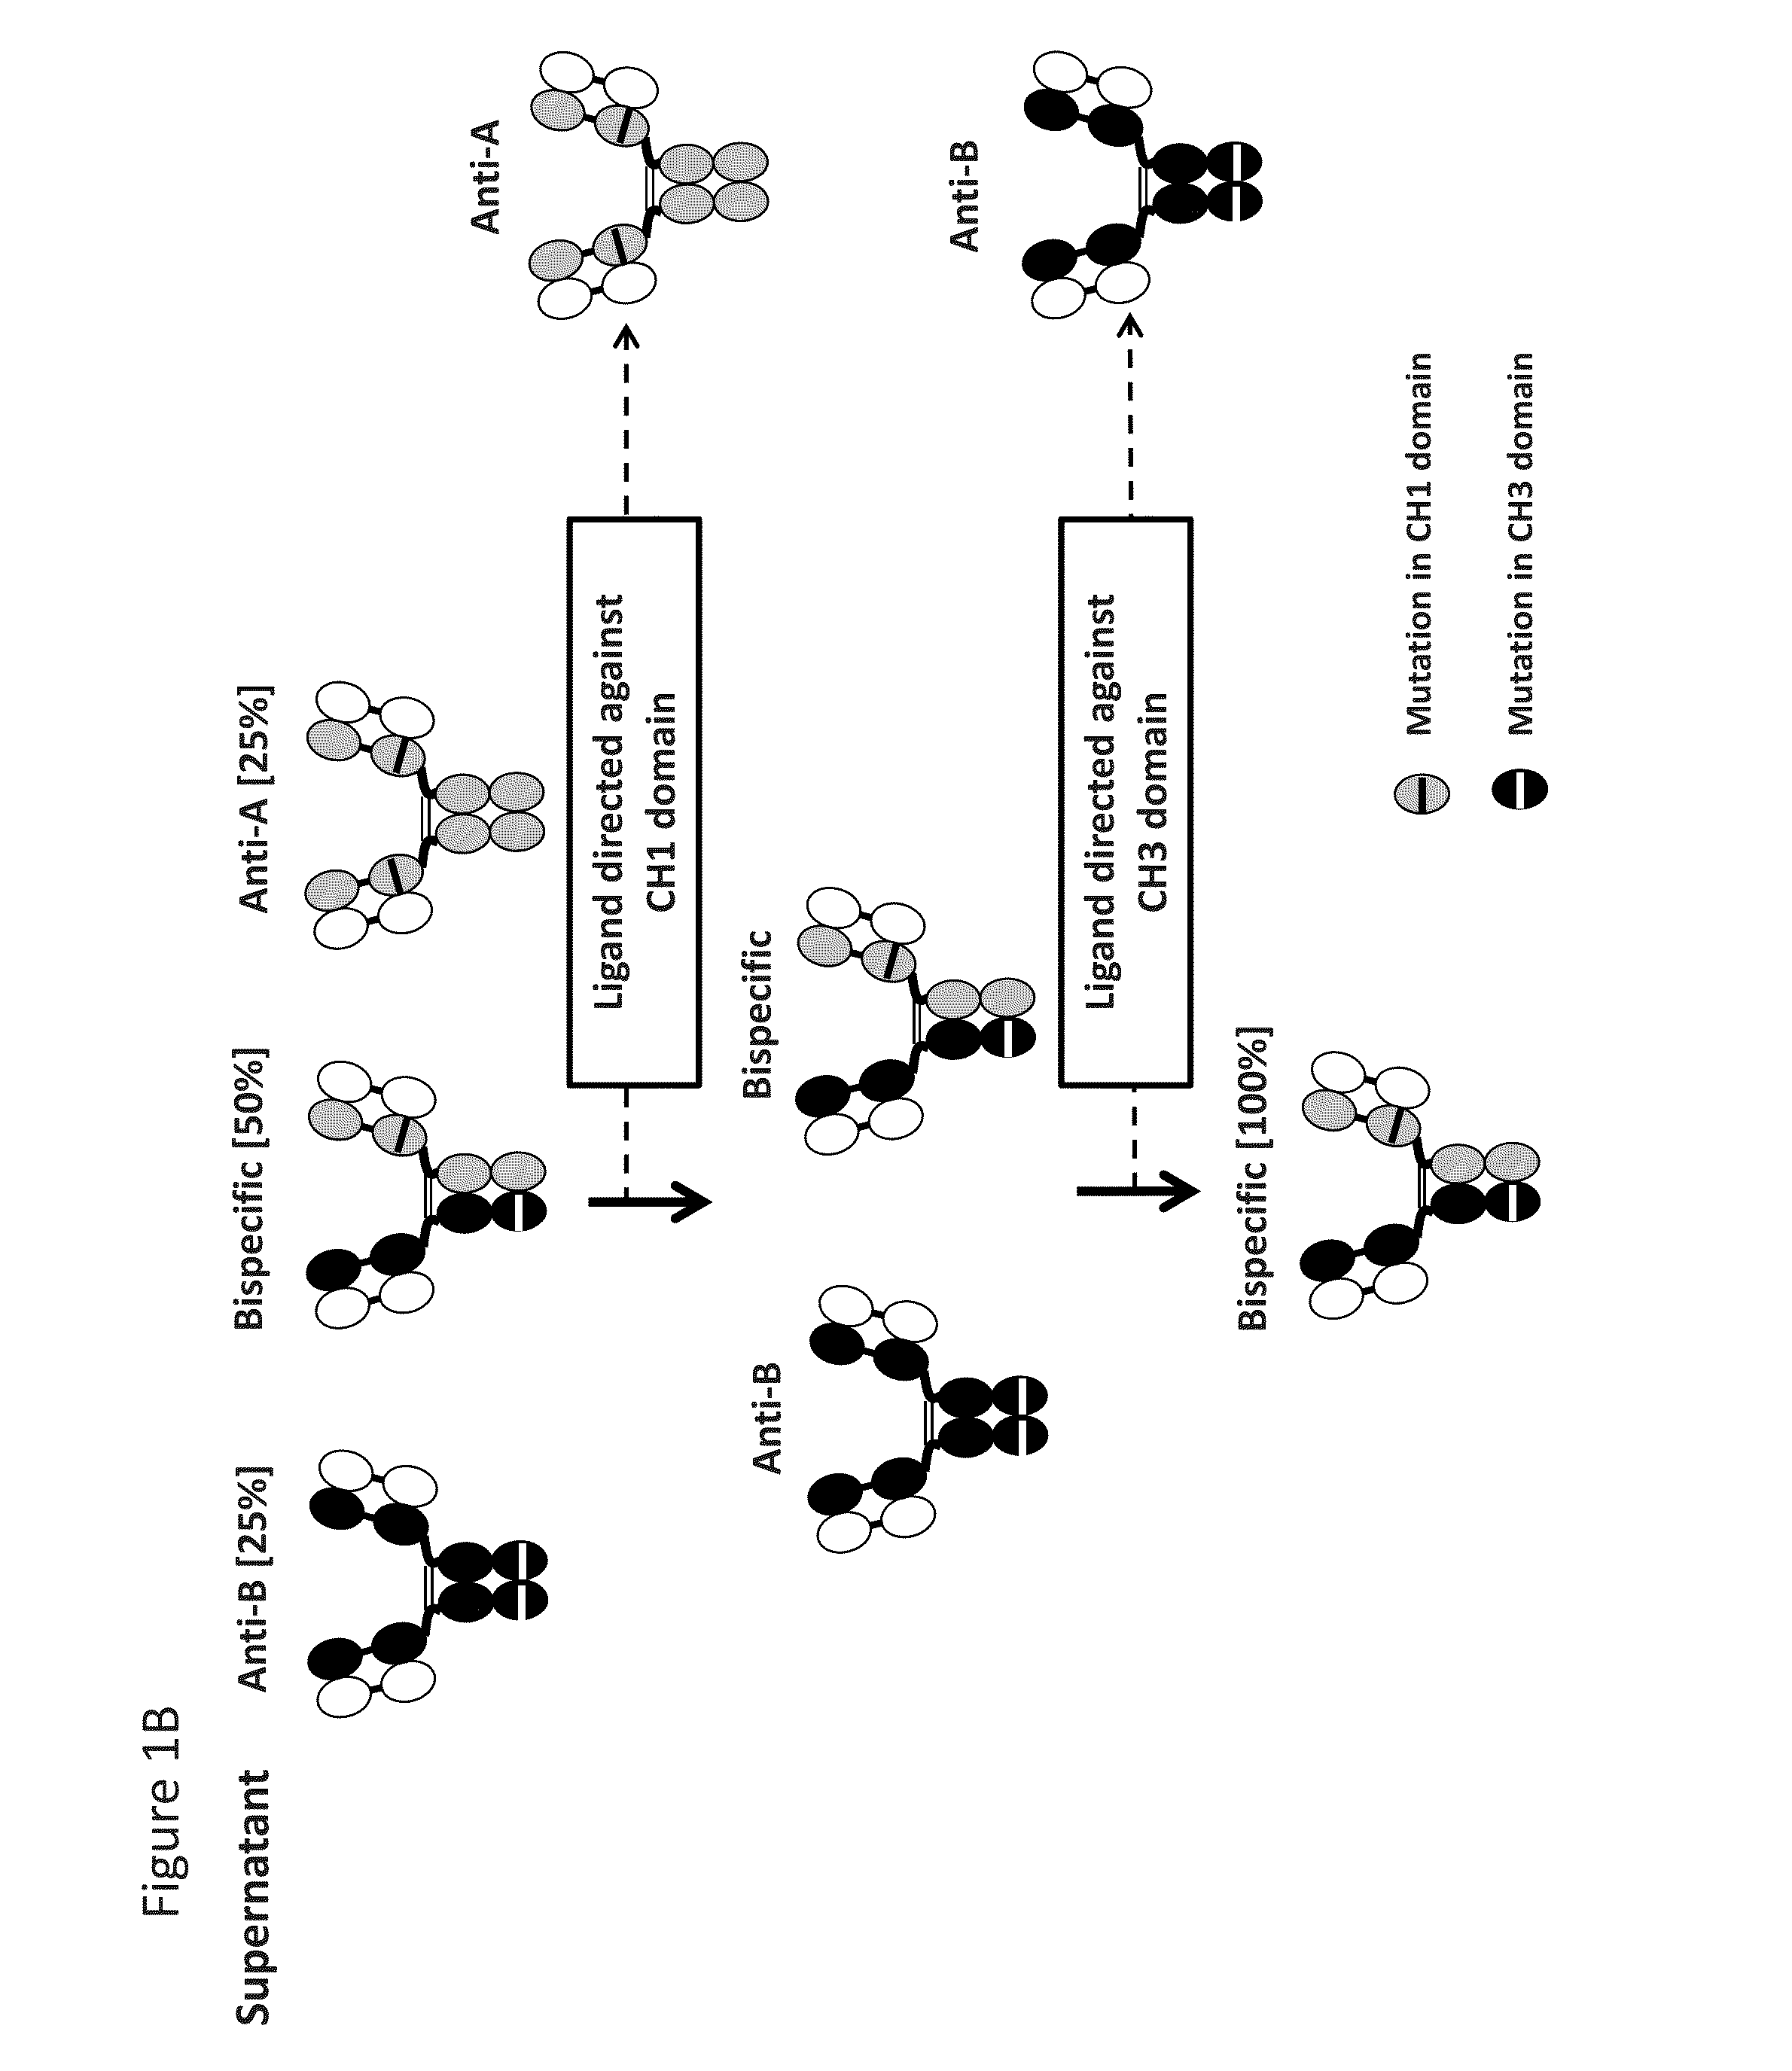 Readily Isolated Bispecific Binding Molecules with Native Format Having Mutated Constant Regions